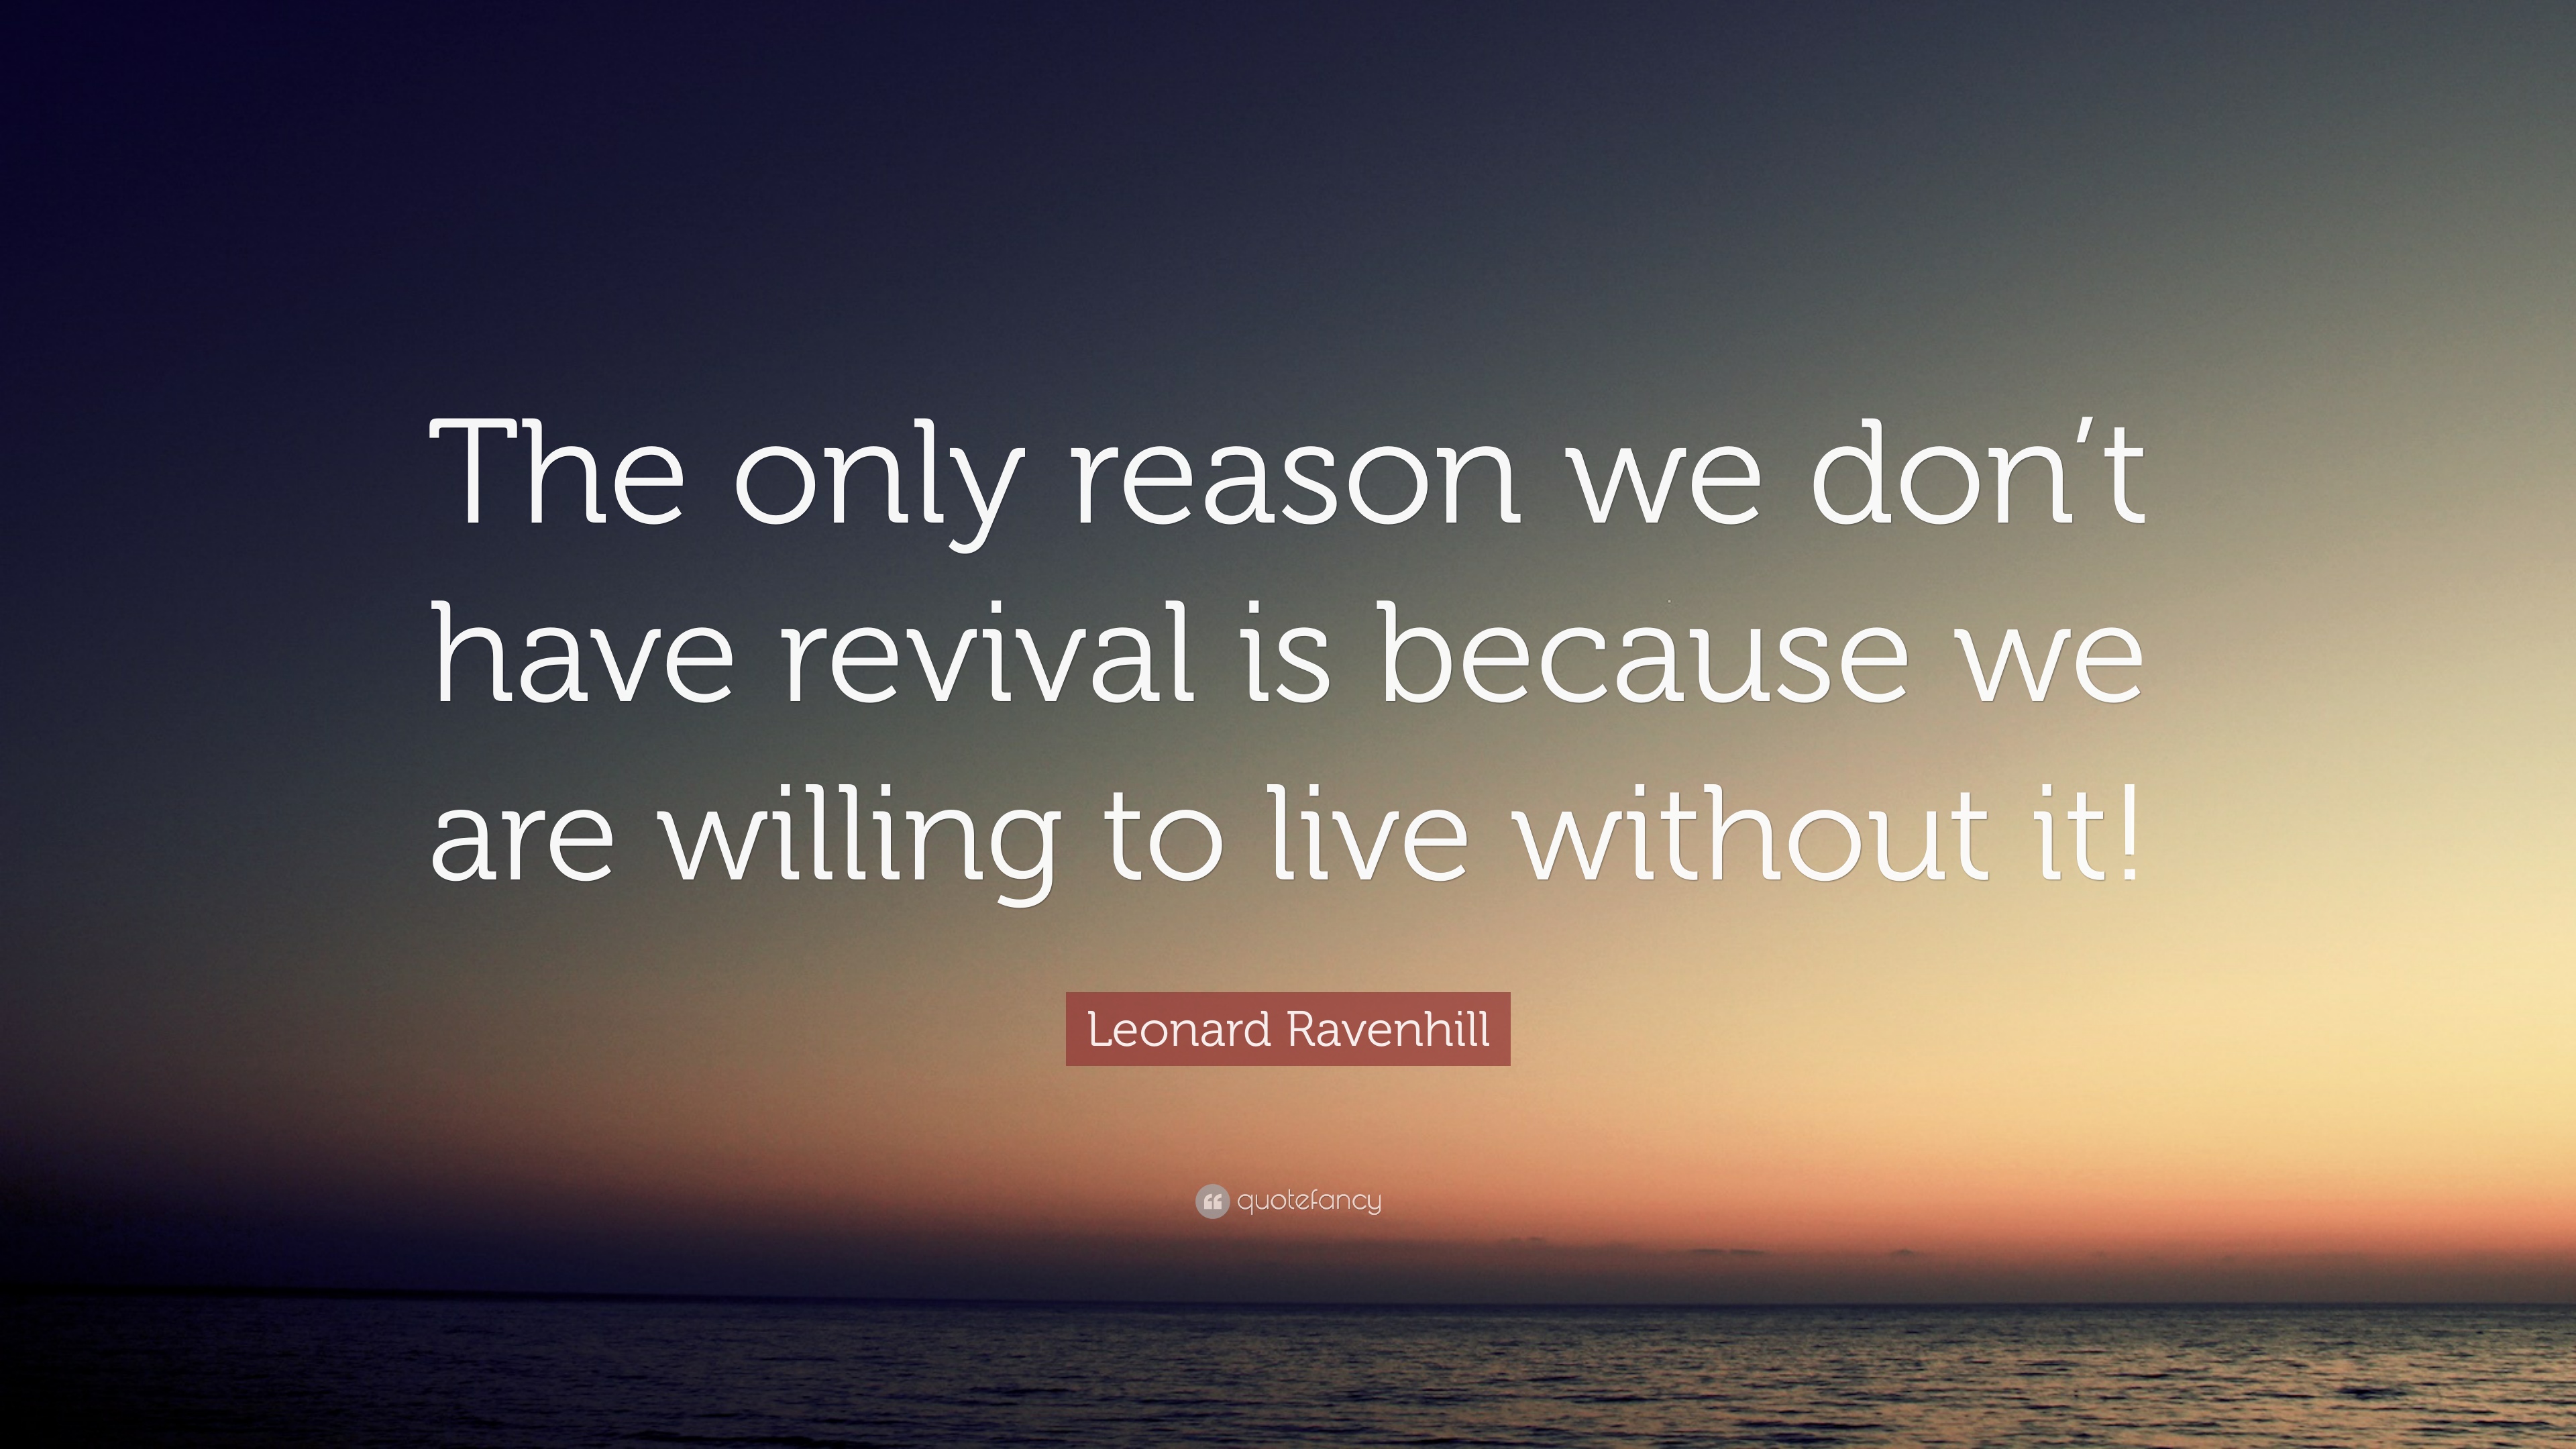 1730913-Leonard-Ravenhill-Quote-The-only-reason-we-don-t-have-revival-is.jpg